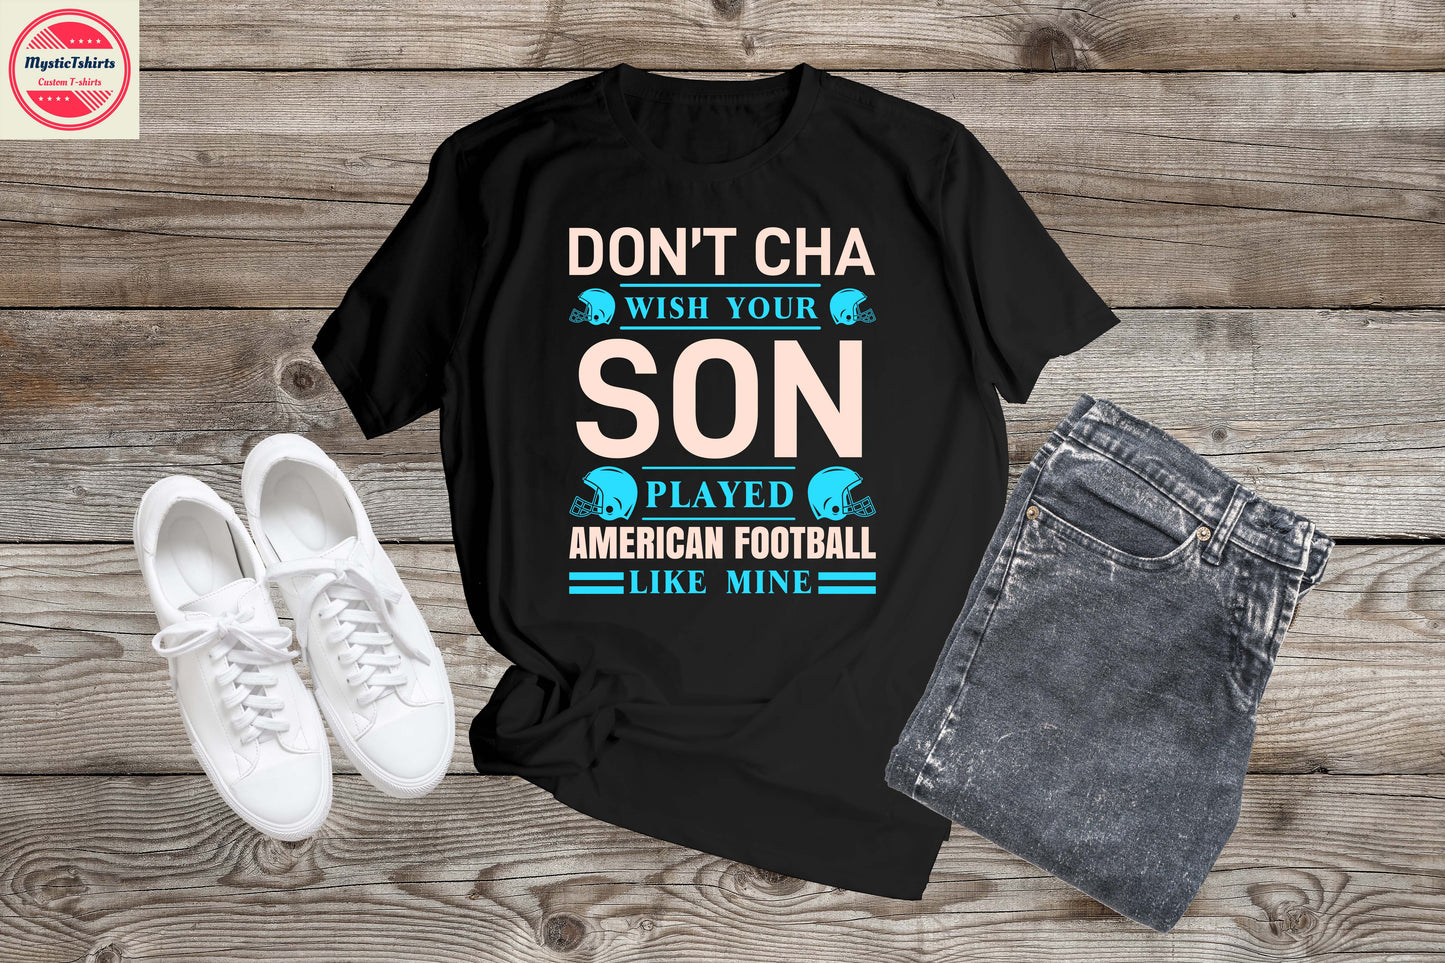 115. DON'T CHA WISH YOUR SON PLAYED AMERICAN FOOTBALL LIKE MINE, Custom Made Shirt, Personalized T-Shirt, Custom Text, Make Your Own Shirt, Custom Tee